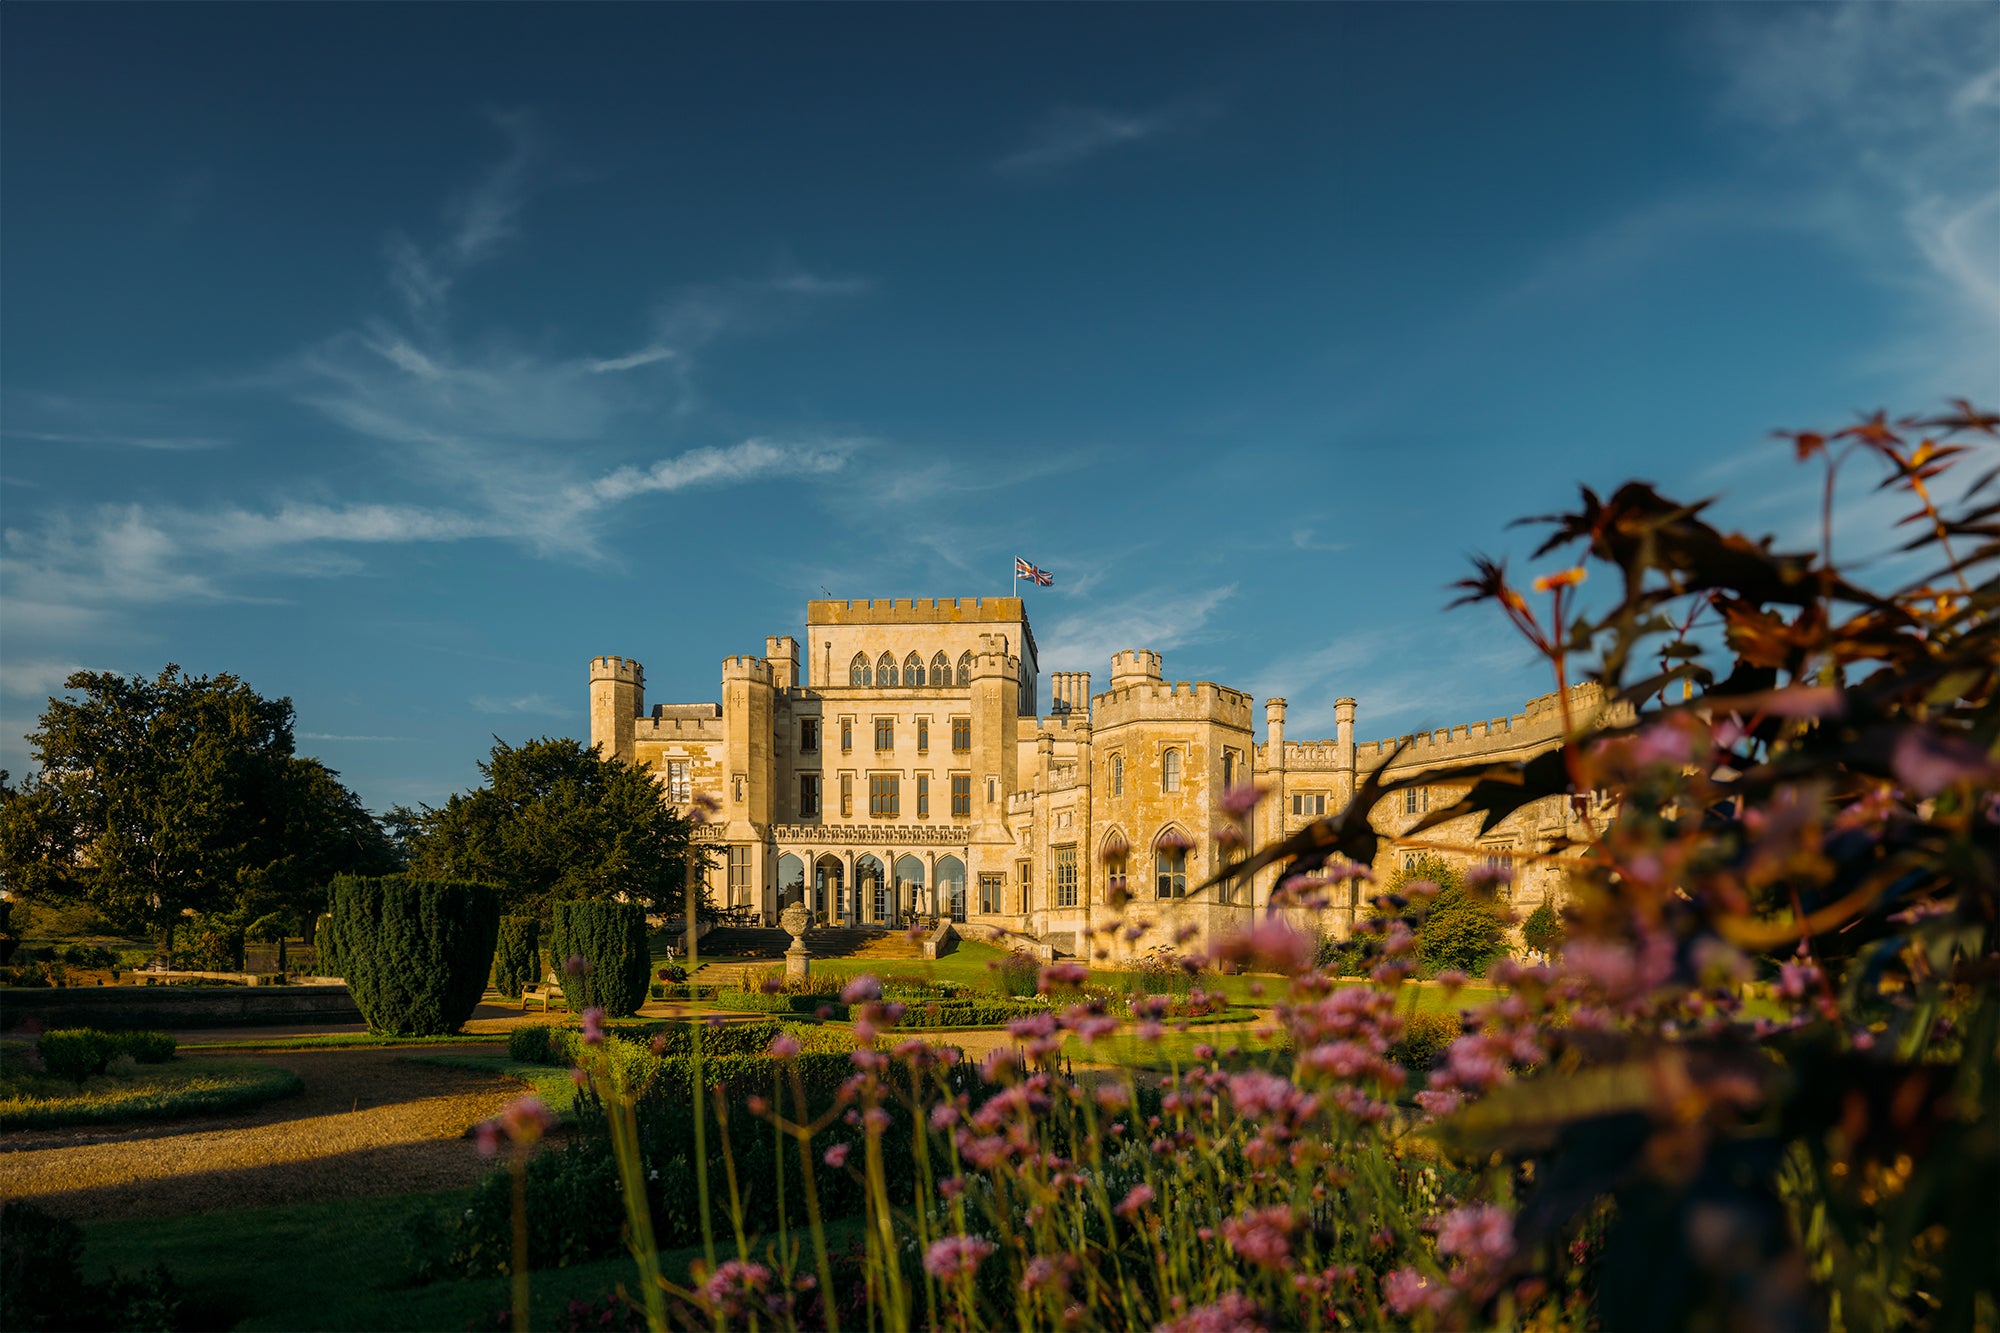 Ashridge House, home to some of the finest gardens anywhere in the country